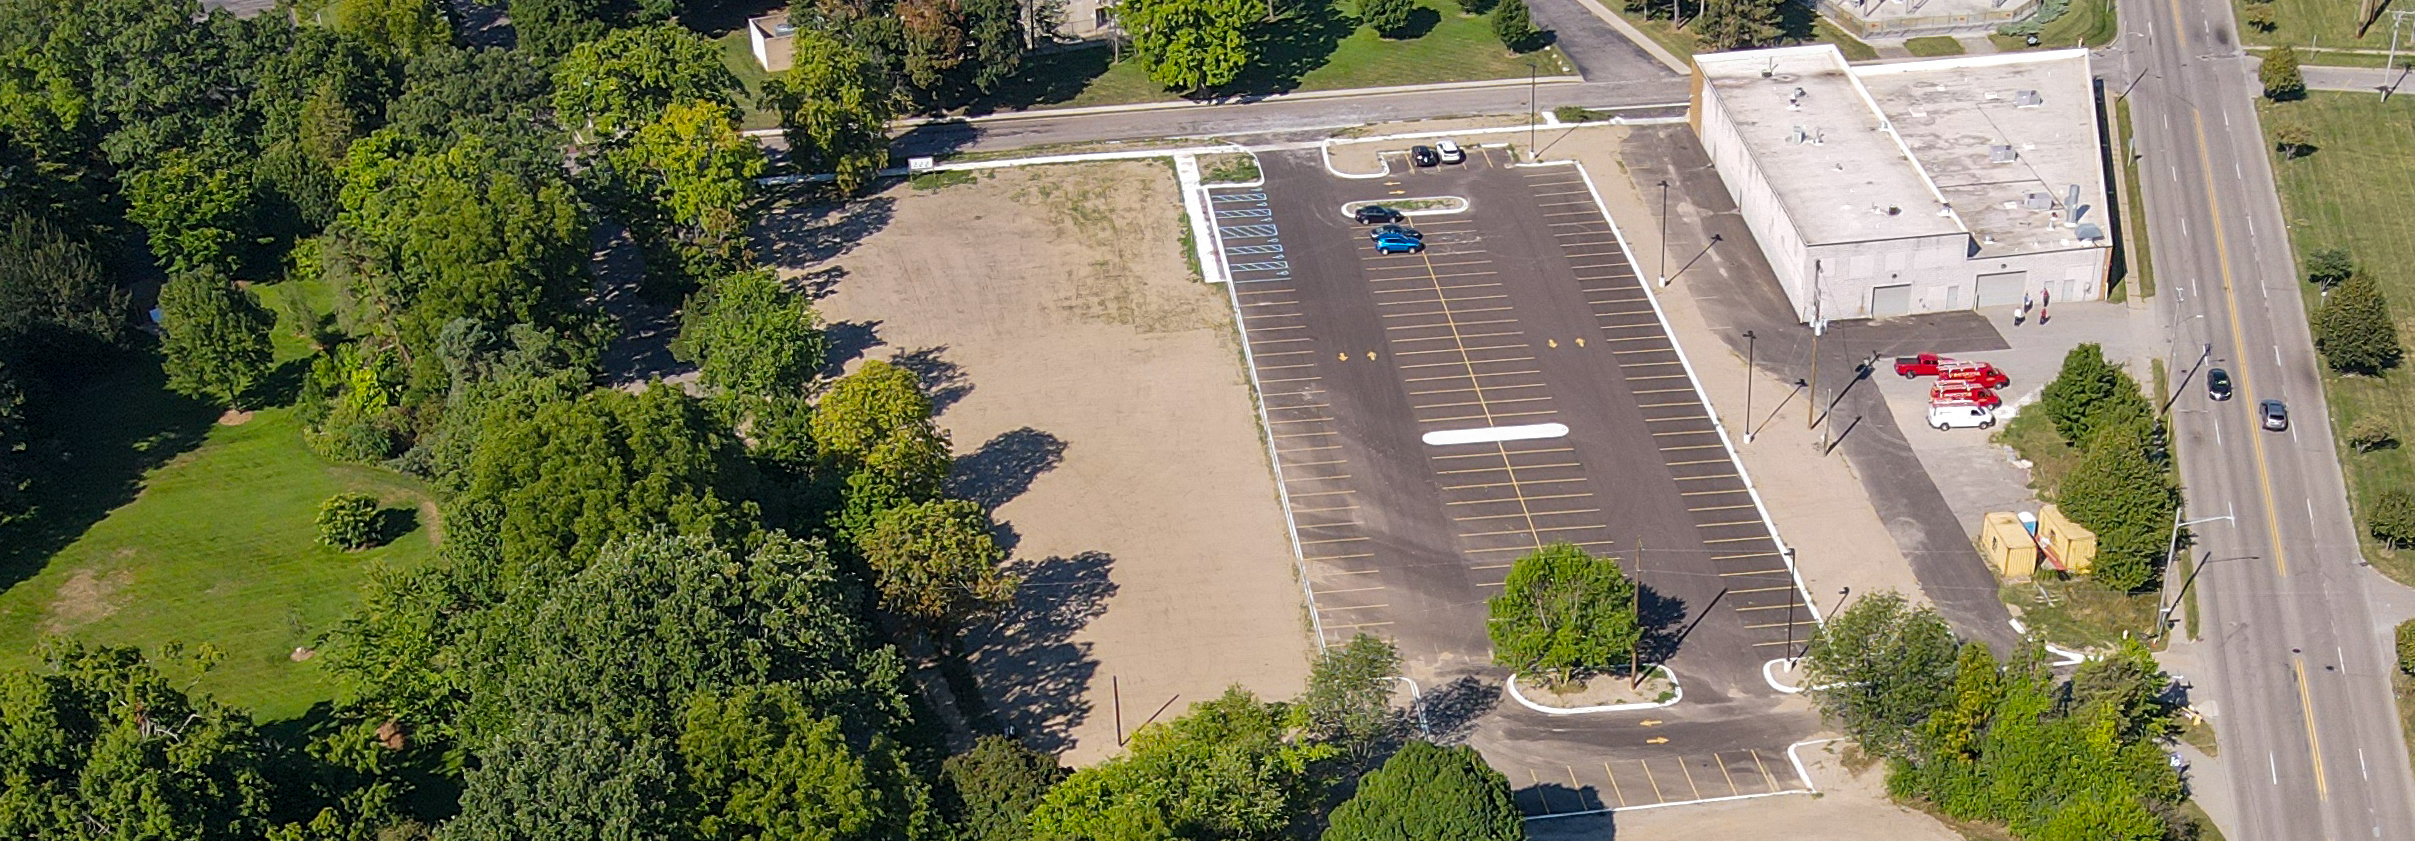 Drone photo of the new parking lot at Applewood